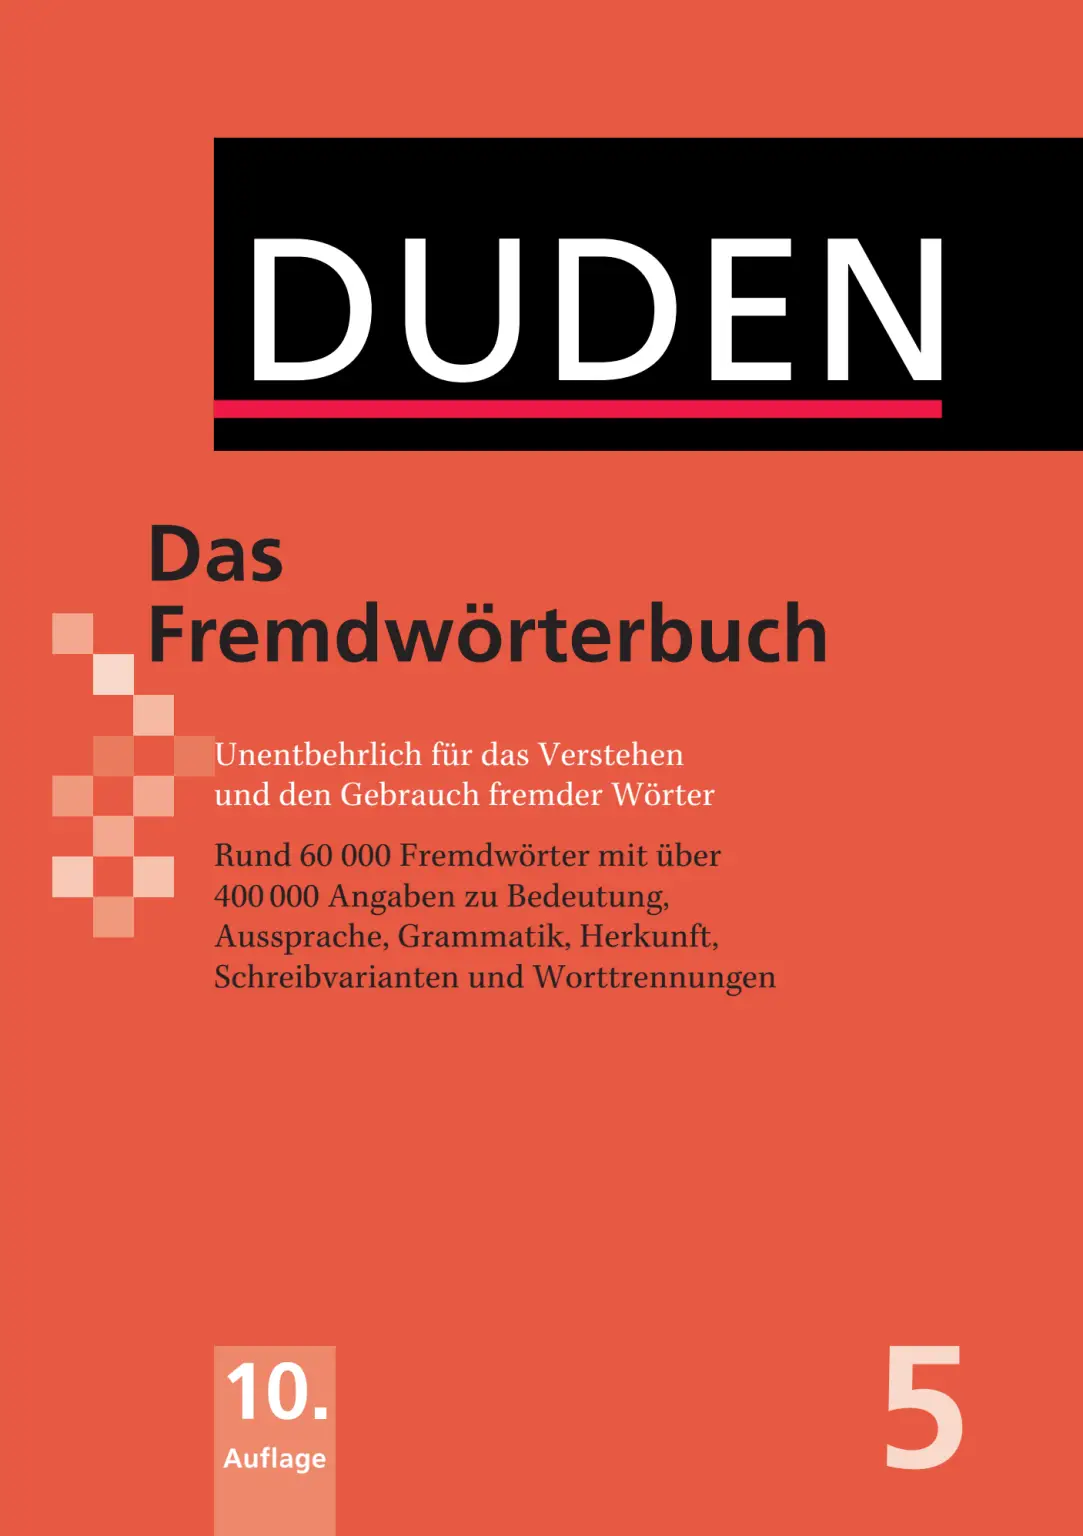 Rich Results on Google's SERP when searching for ''Duden-Das-Fremdworterbuch''